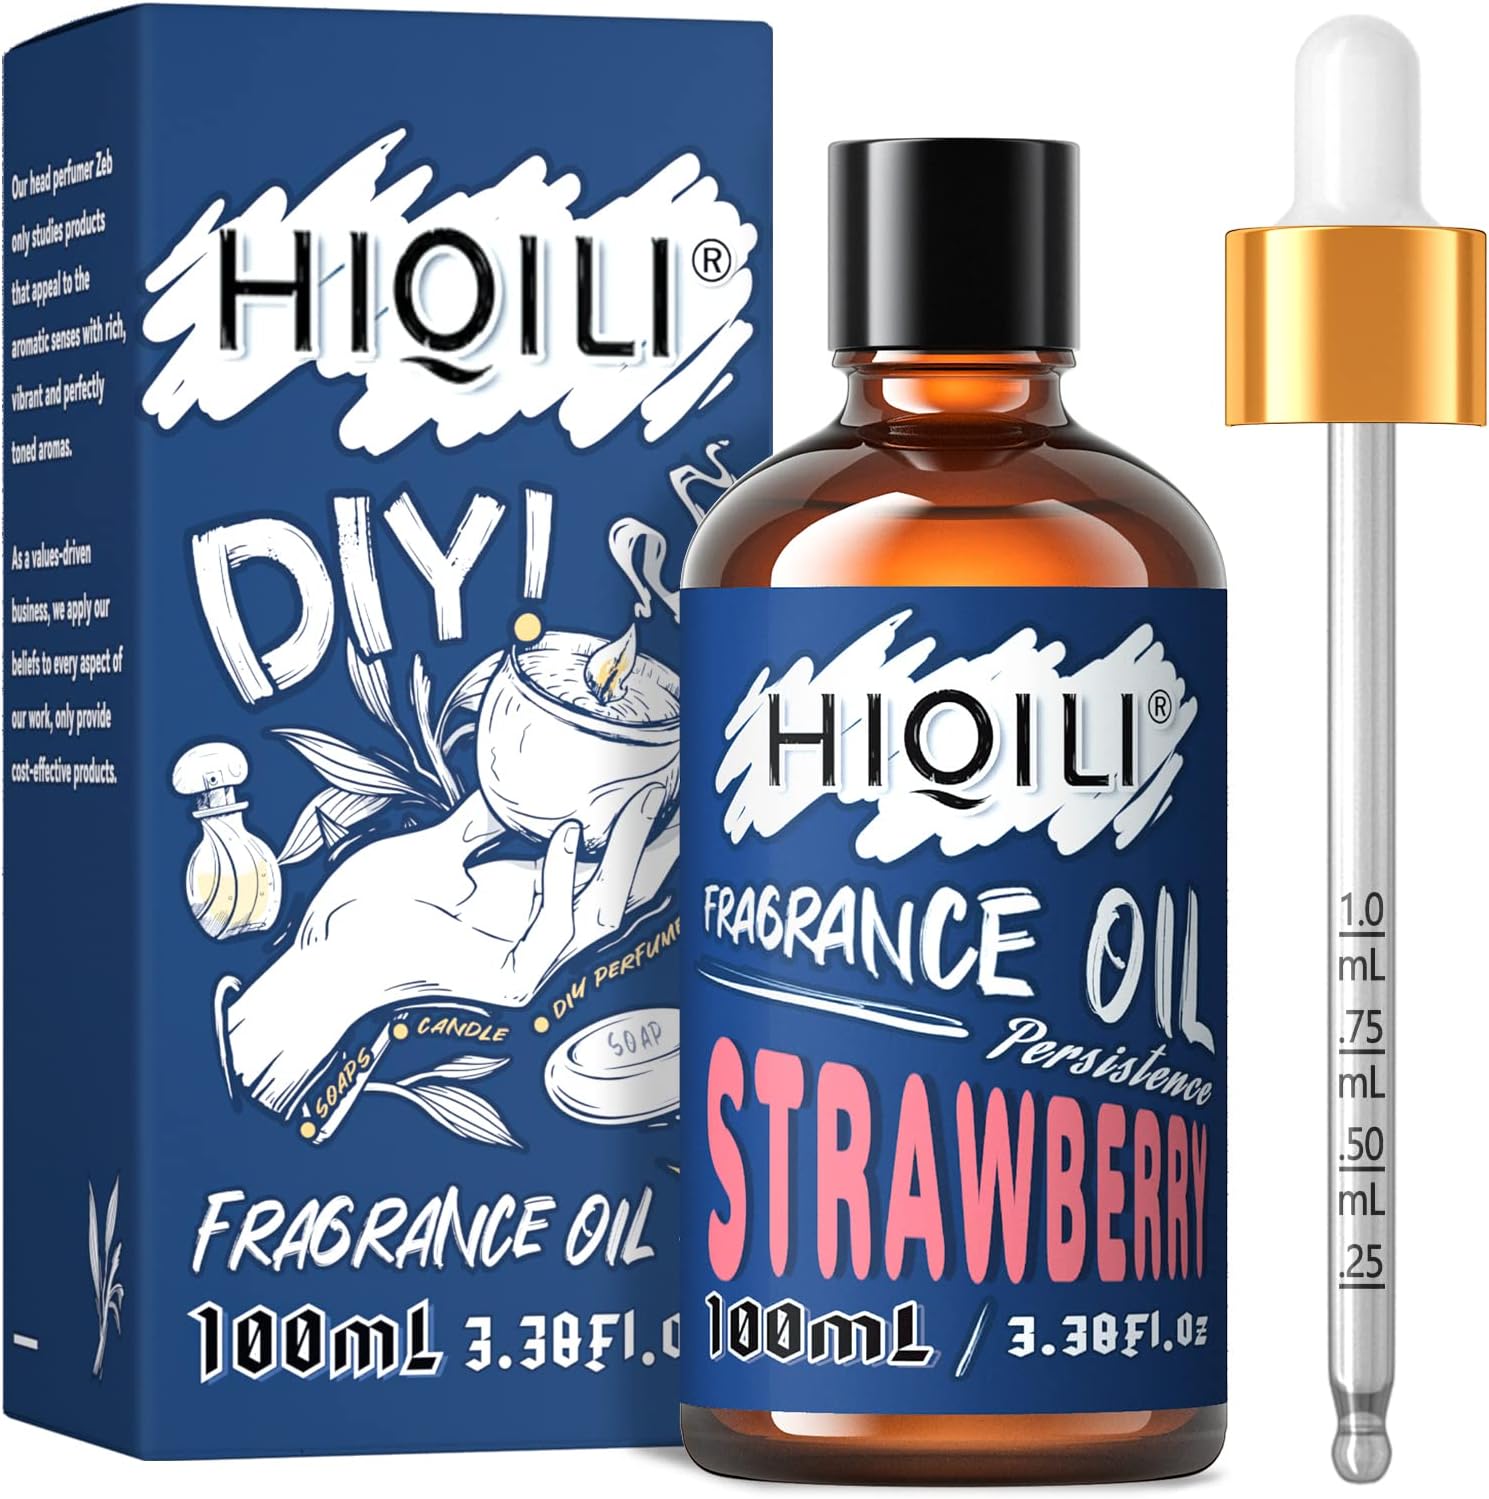 HIQILI Strawberry Fragrance Oil 100ml, Essential Oil for Diffuser Car Freshies Warmers, Permium Candle Scented Oil for Candles Making Soap Slime